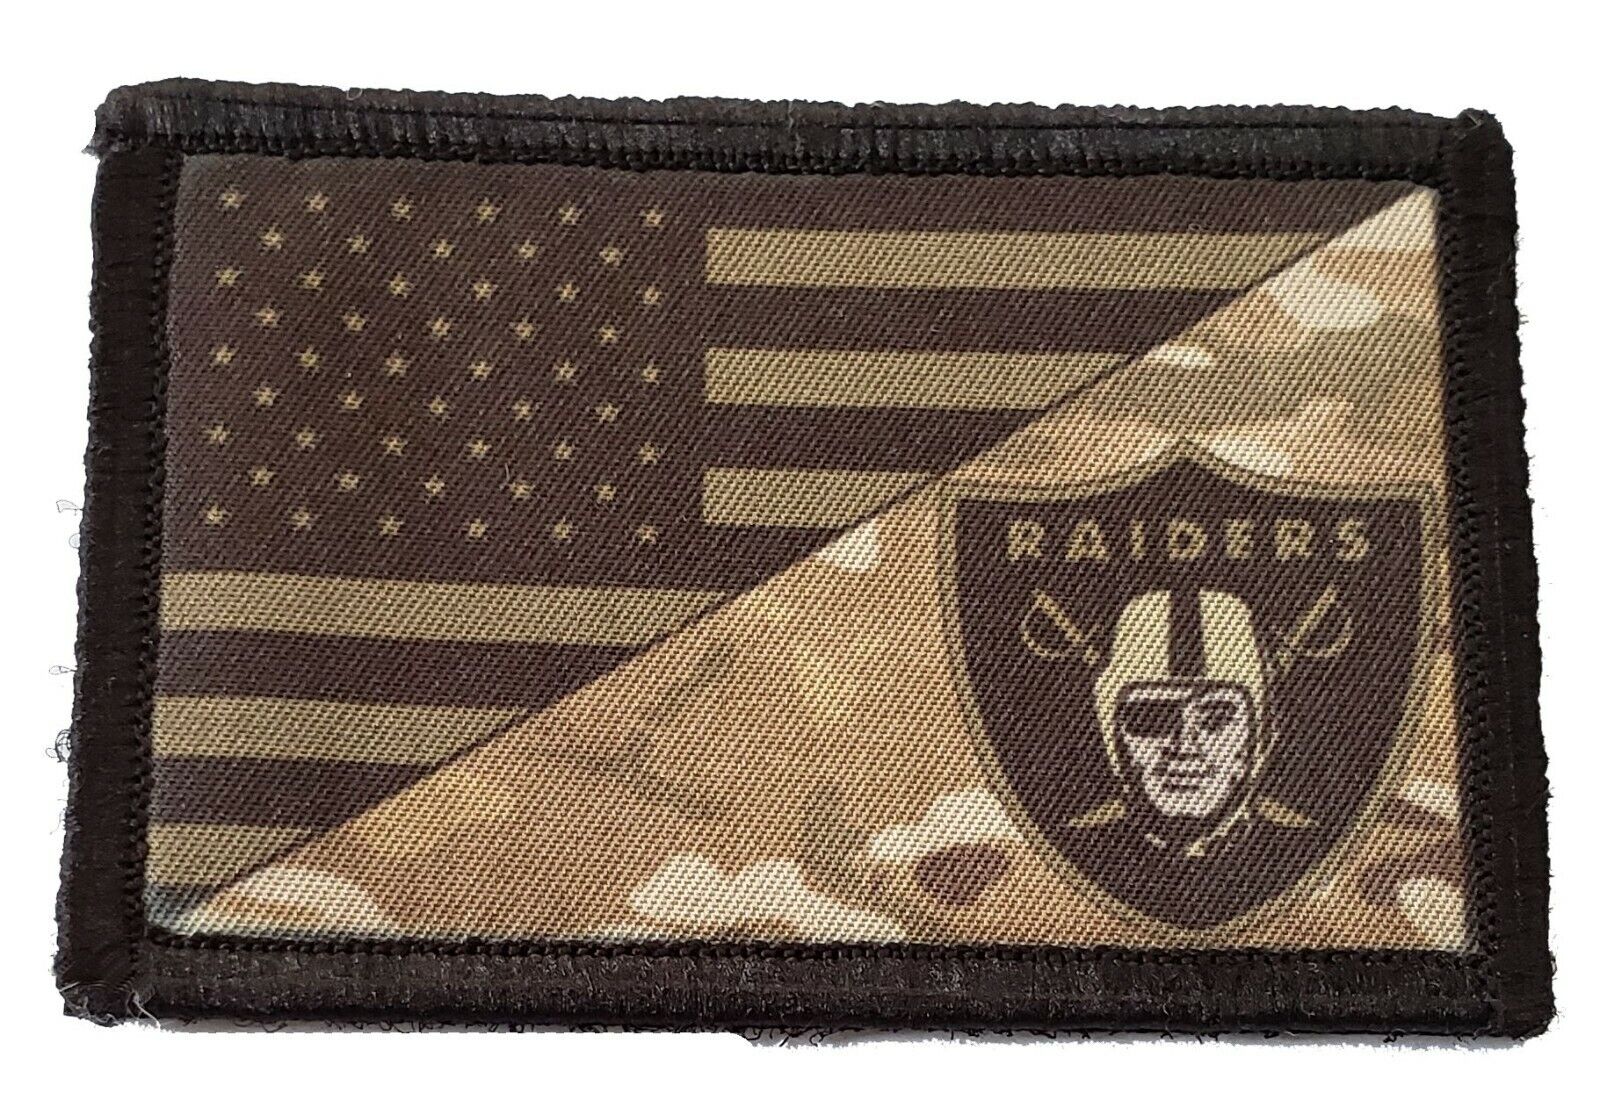 Subdued Multicam LA RAIDERS USA FLAG Morale Patch Tactical Military Army